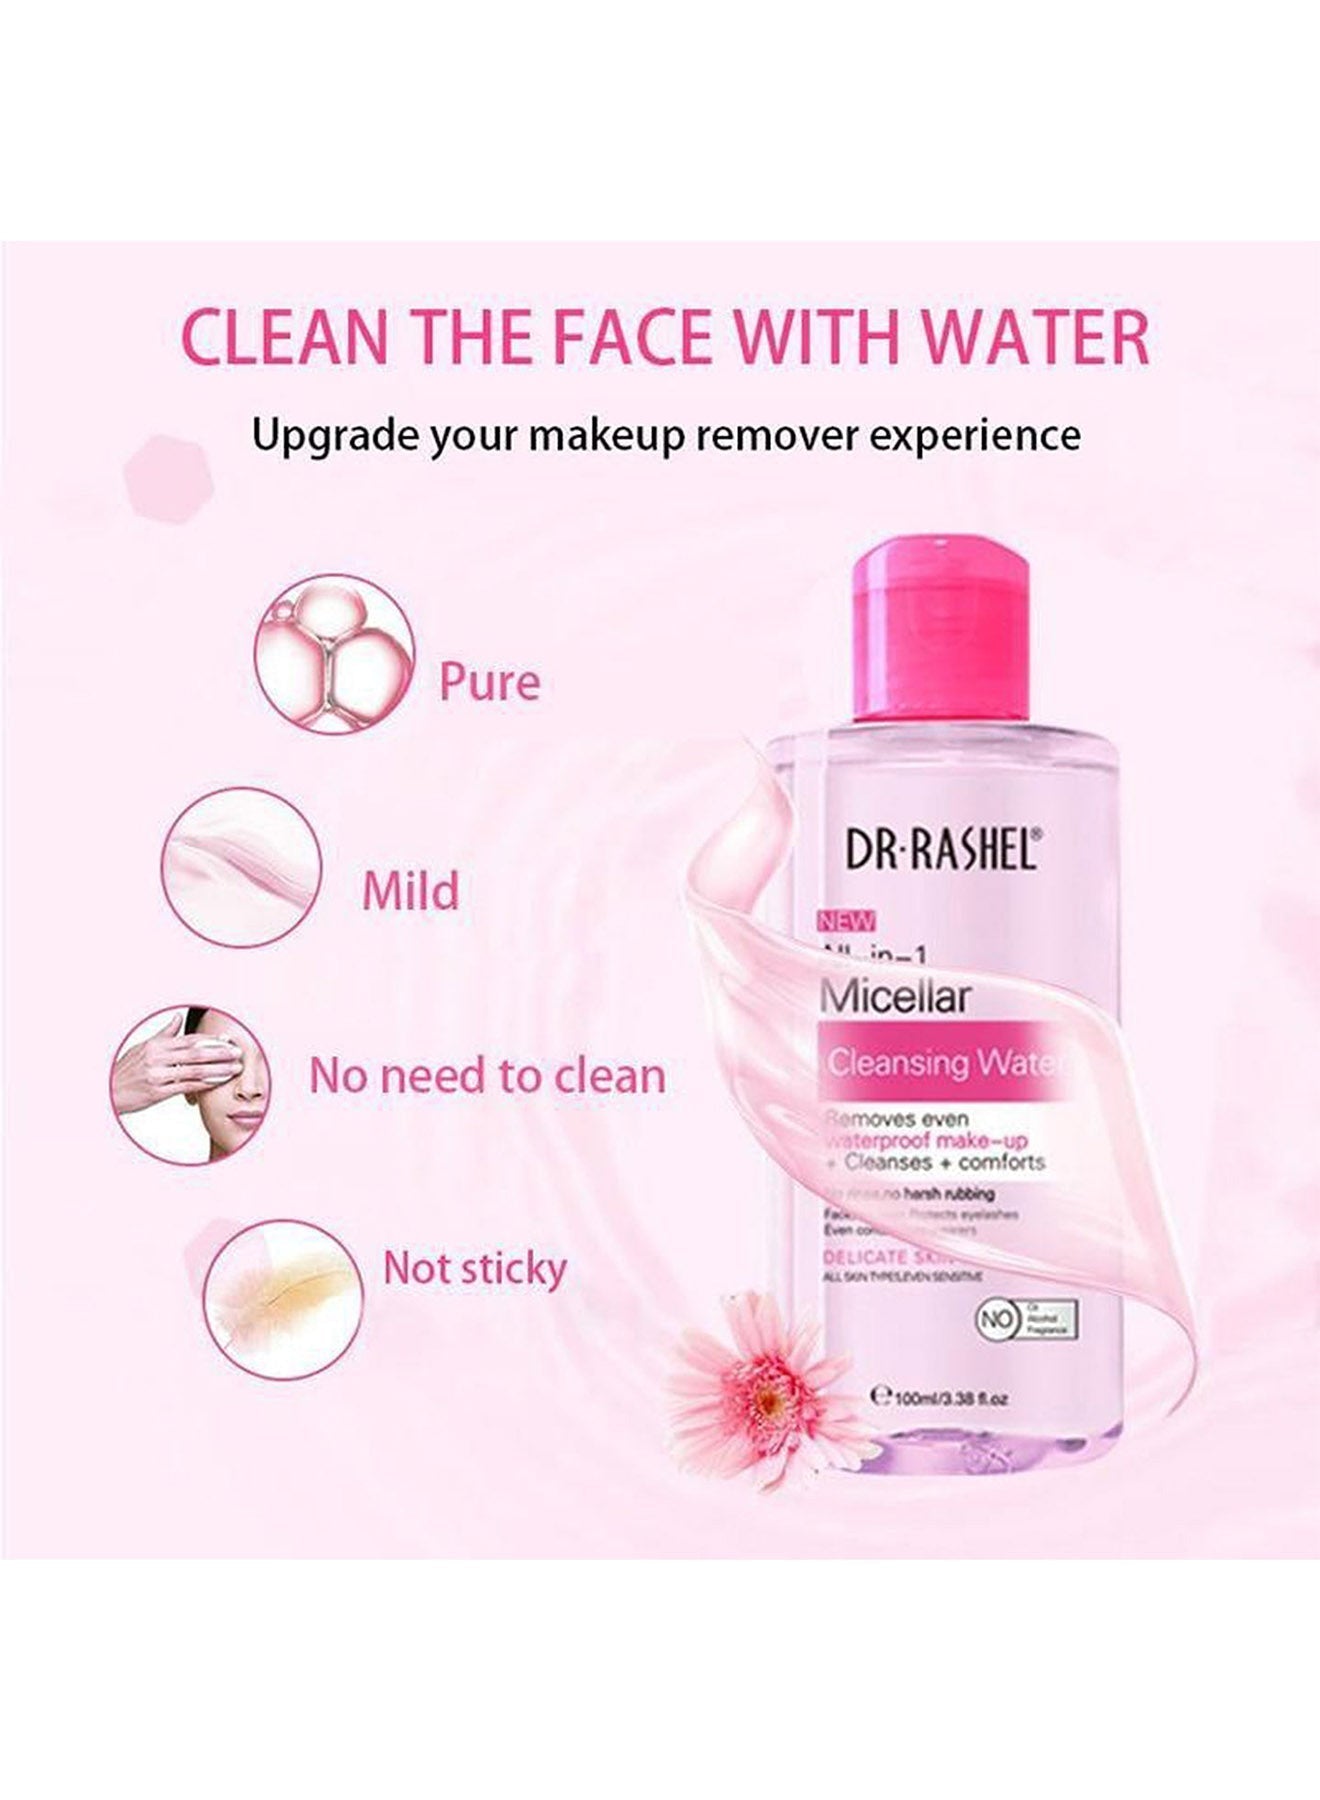 Dr Rashel New AllIn1 Micellar Cleansing Water 100 Ml Makeup remover Value Pack of 3 